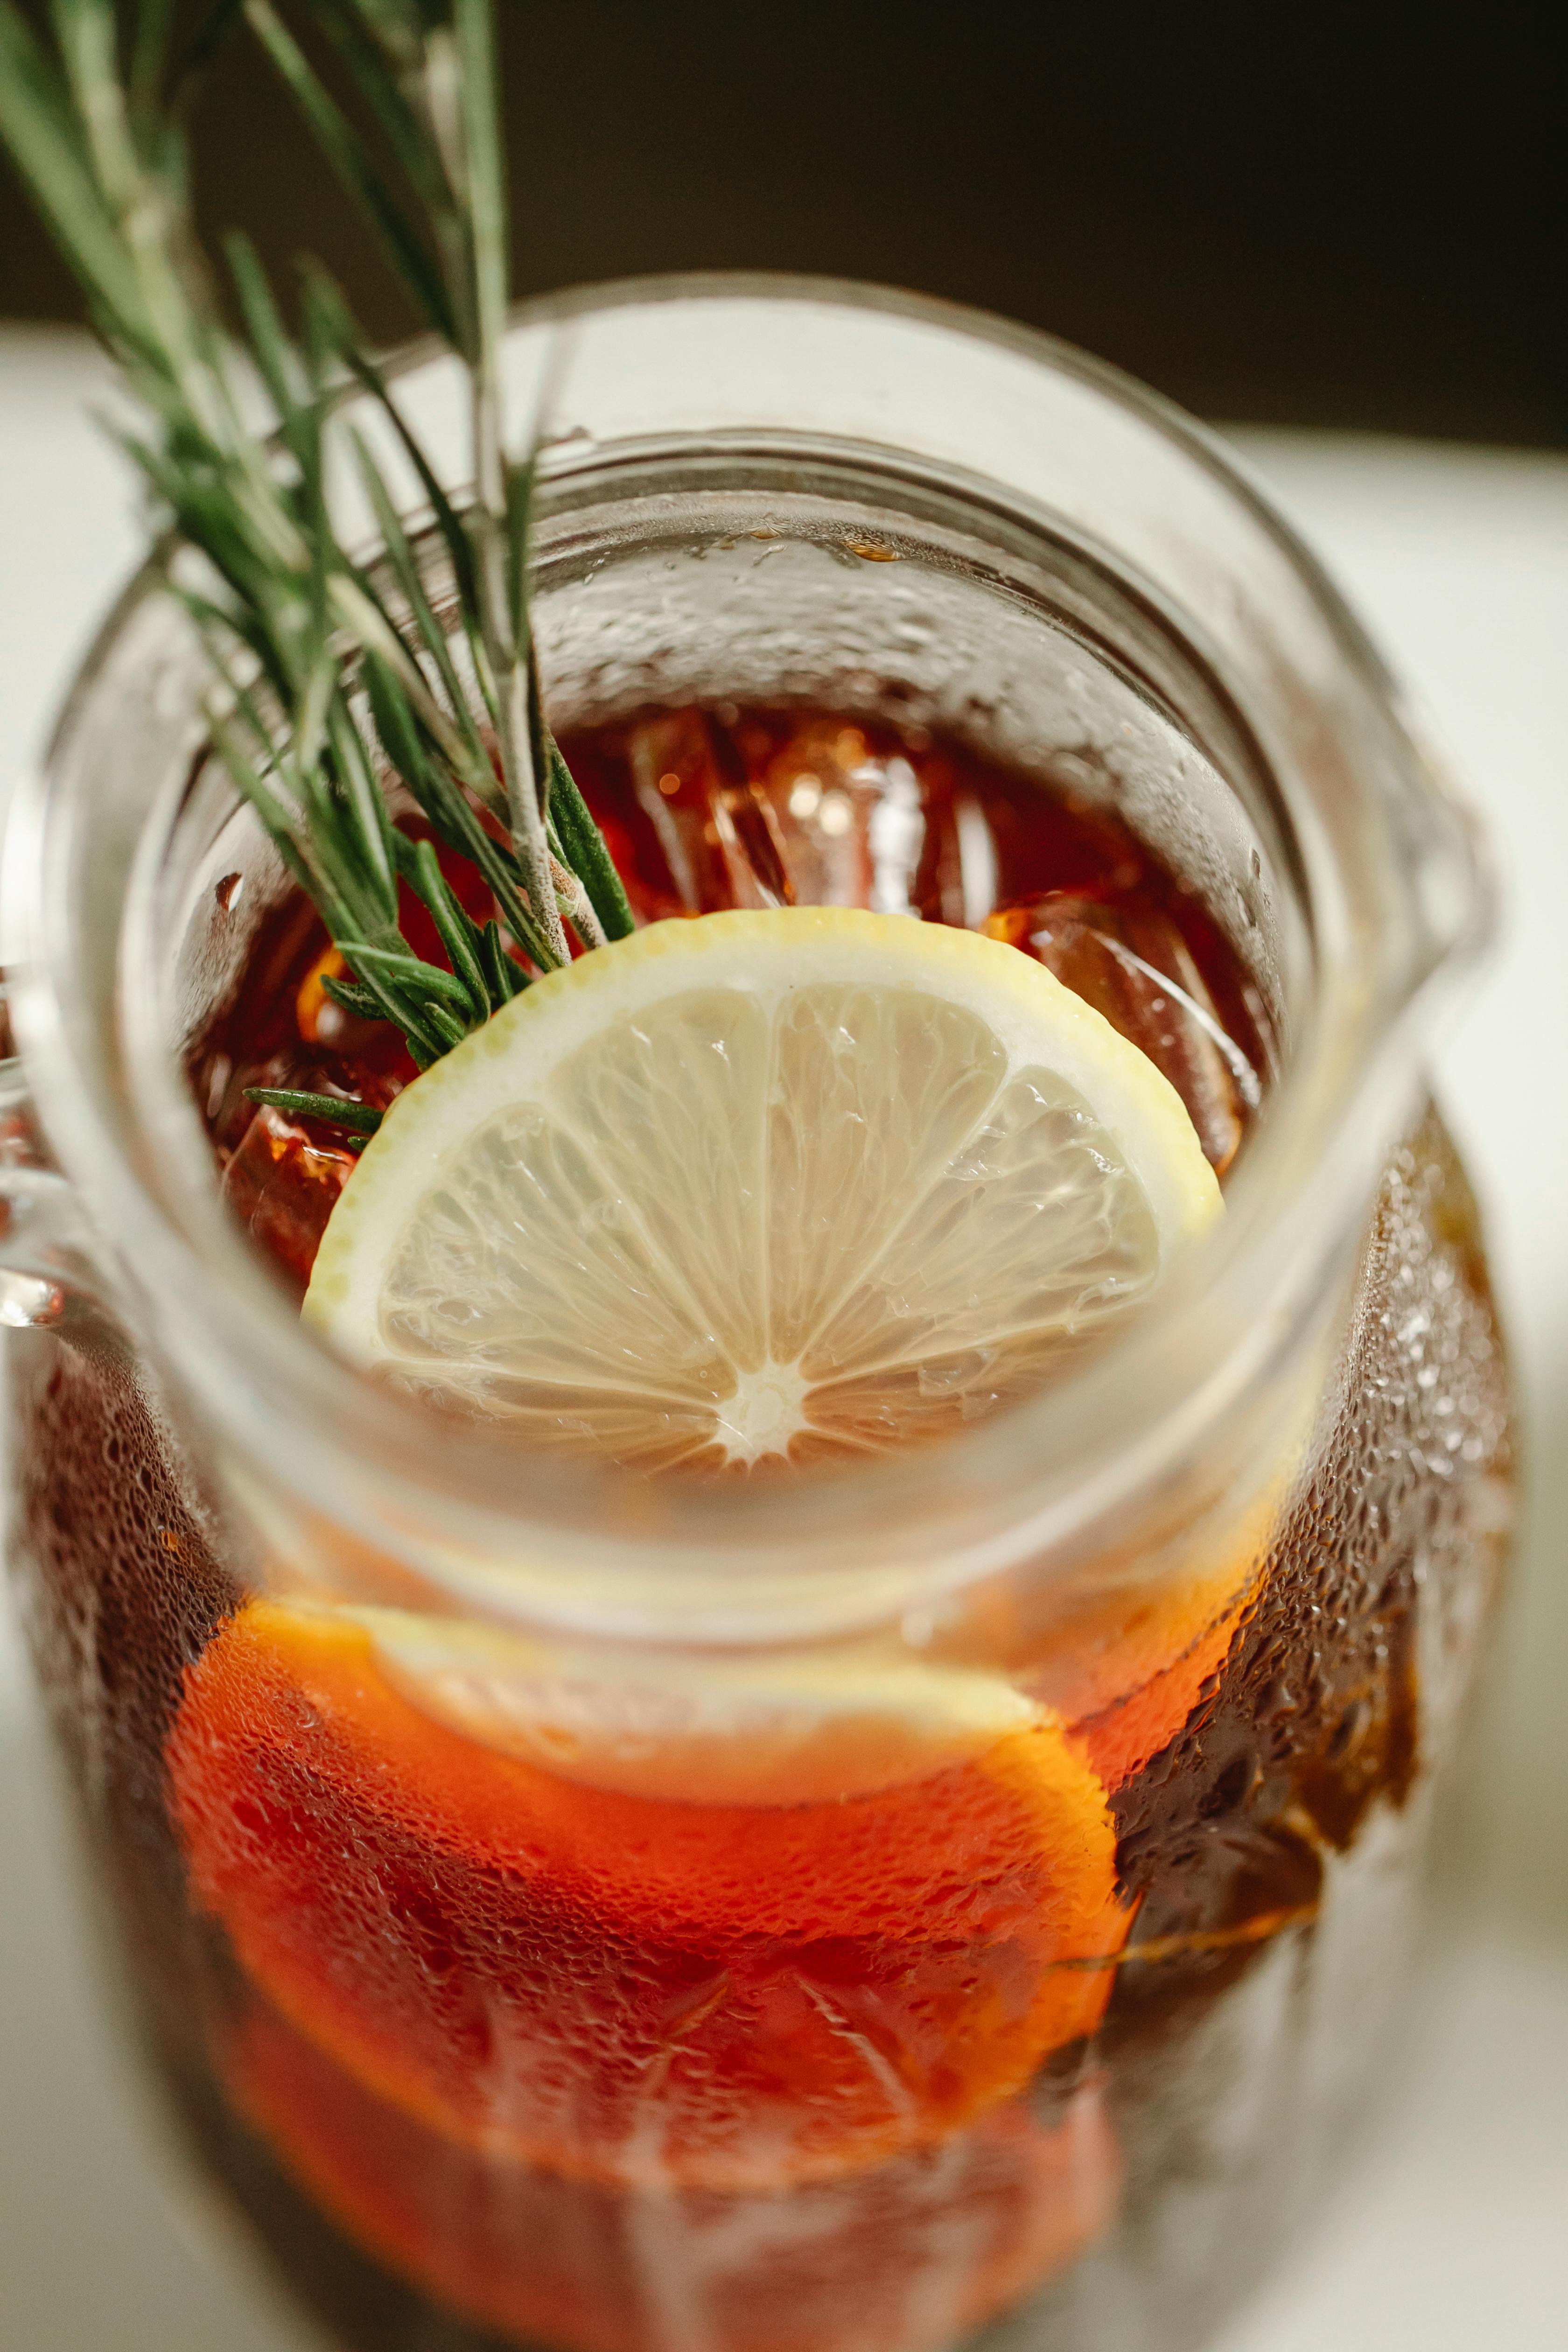 Sangria And Summer Grilling: A Favourite Match Made In Heaven For BBQ Bash